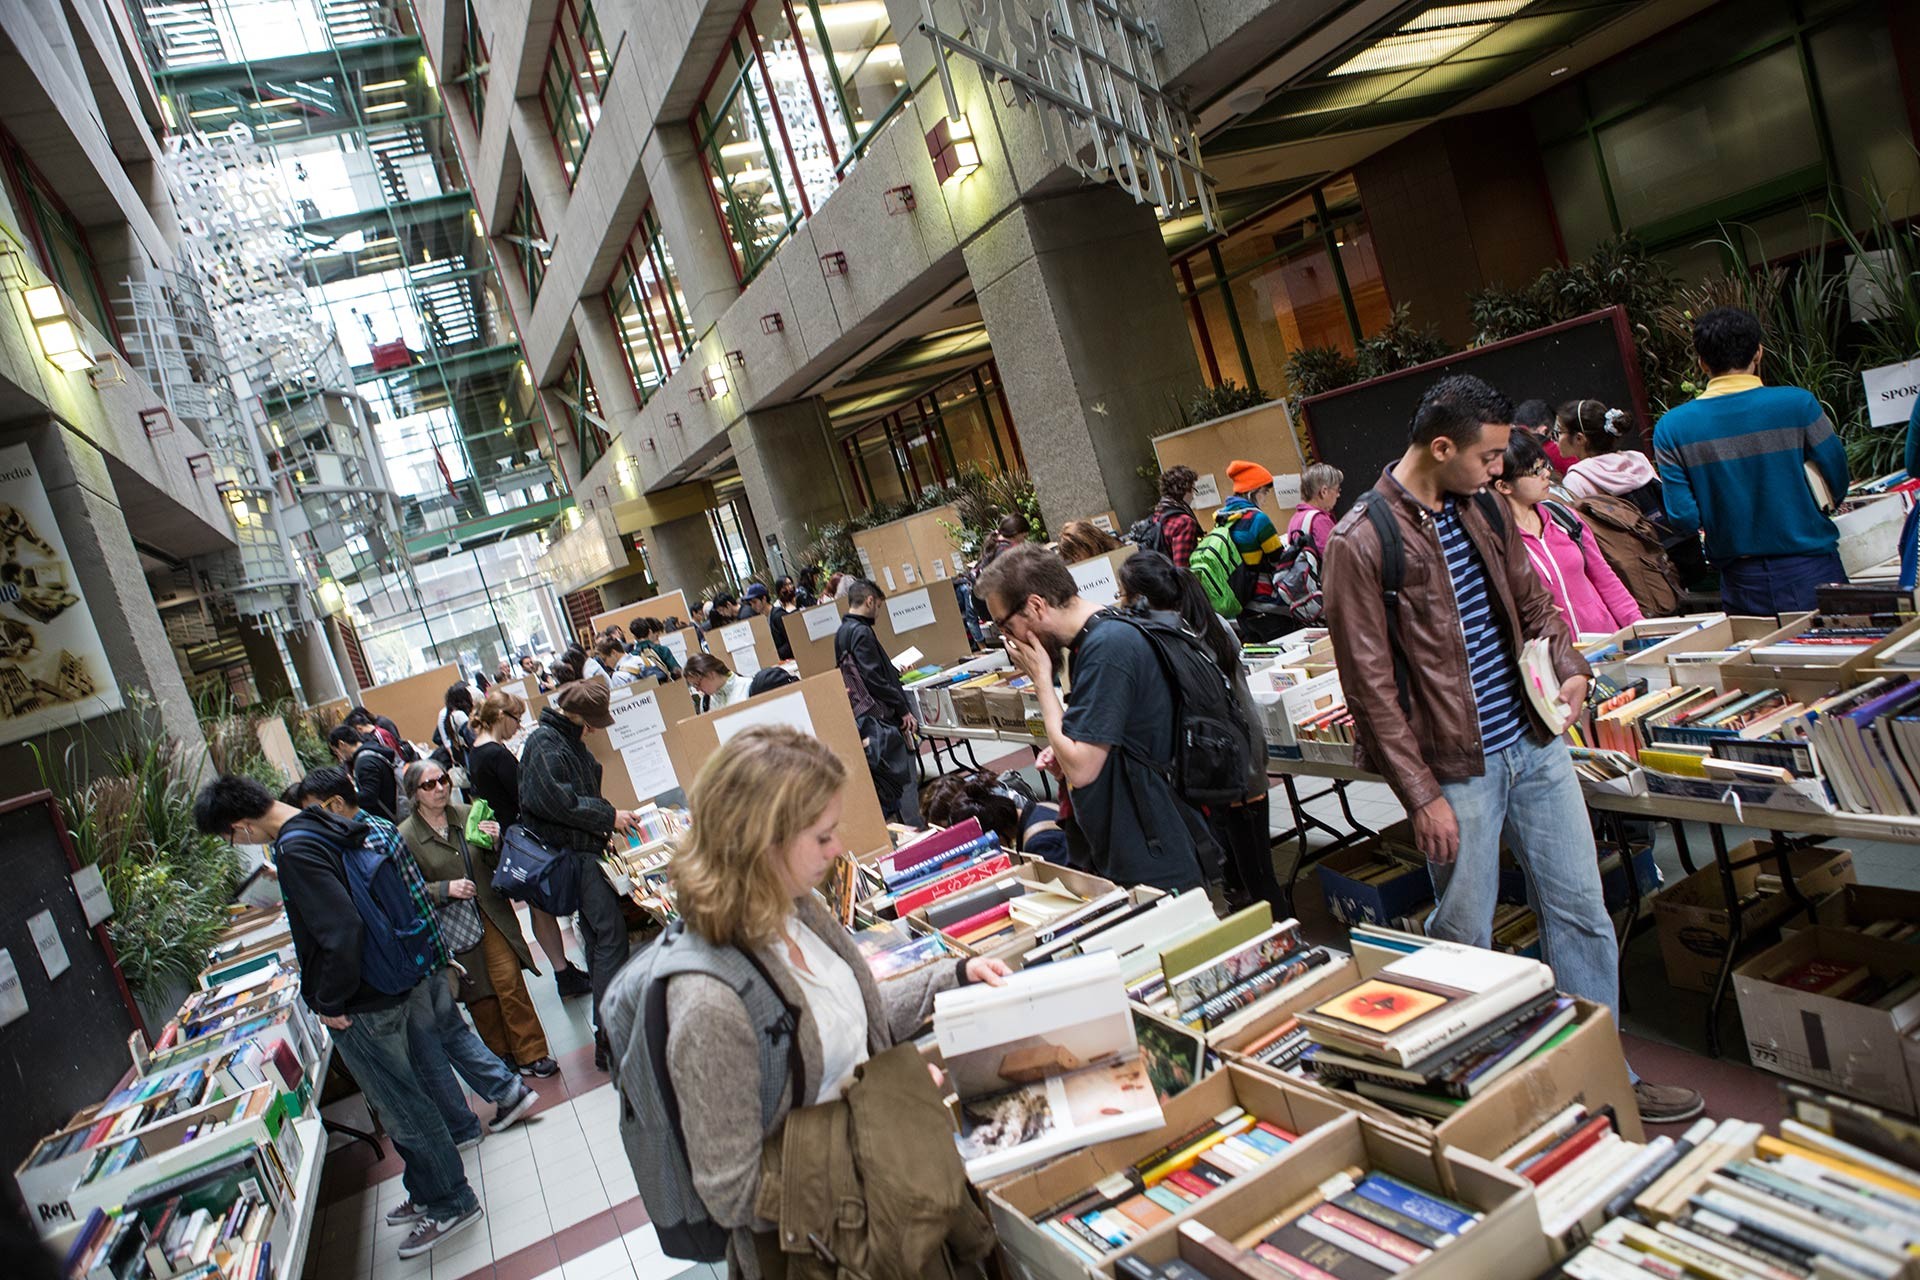 A crowd of people look at and select books from tables set up in an atrium